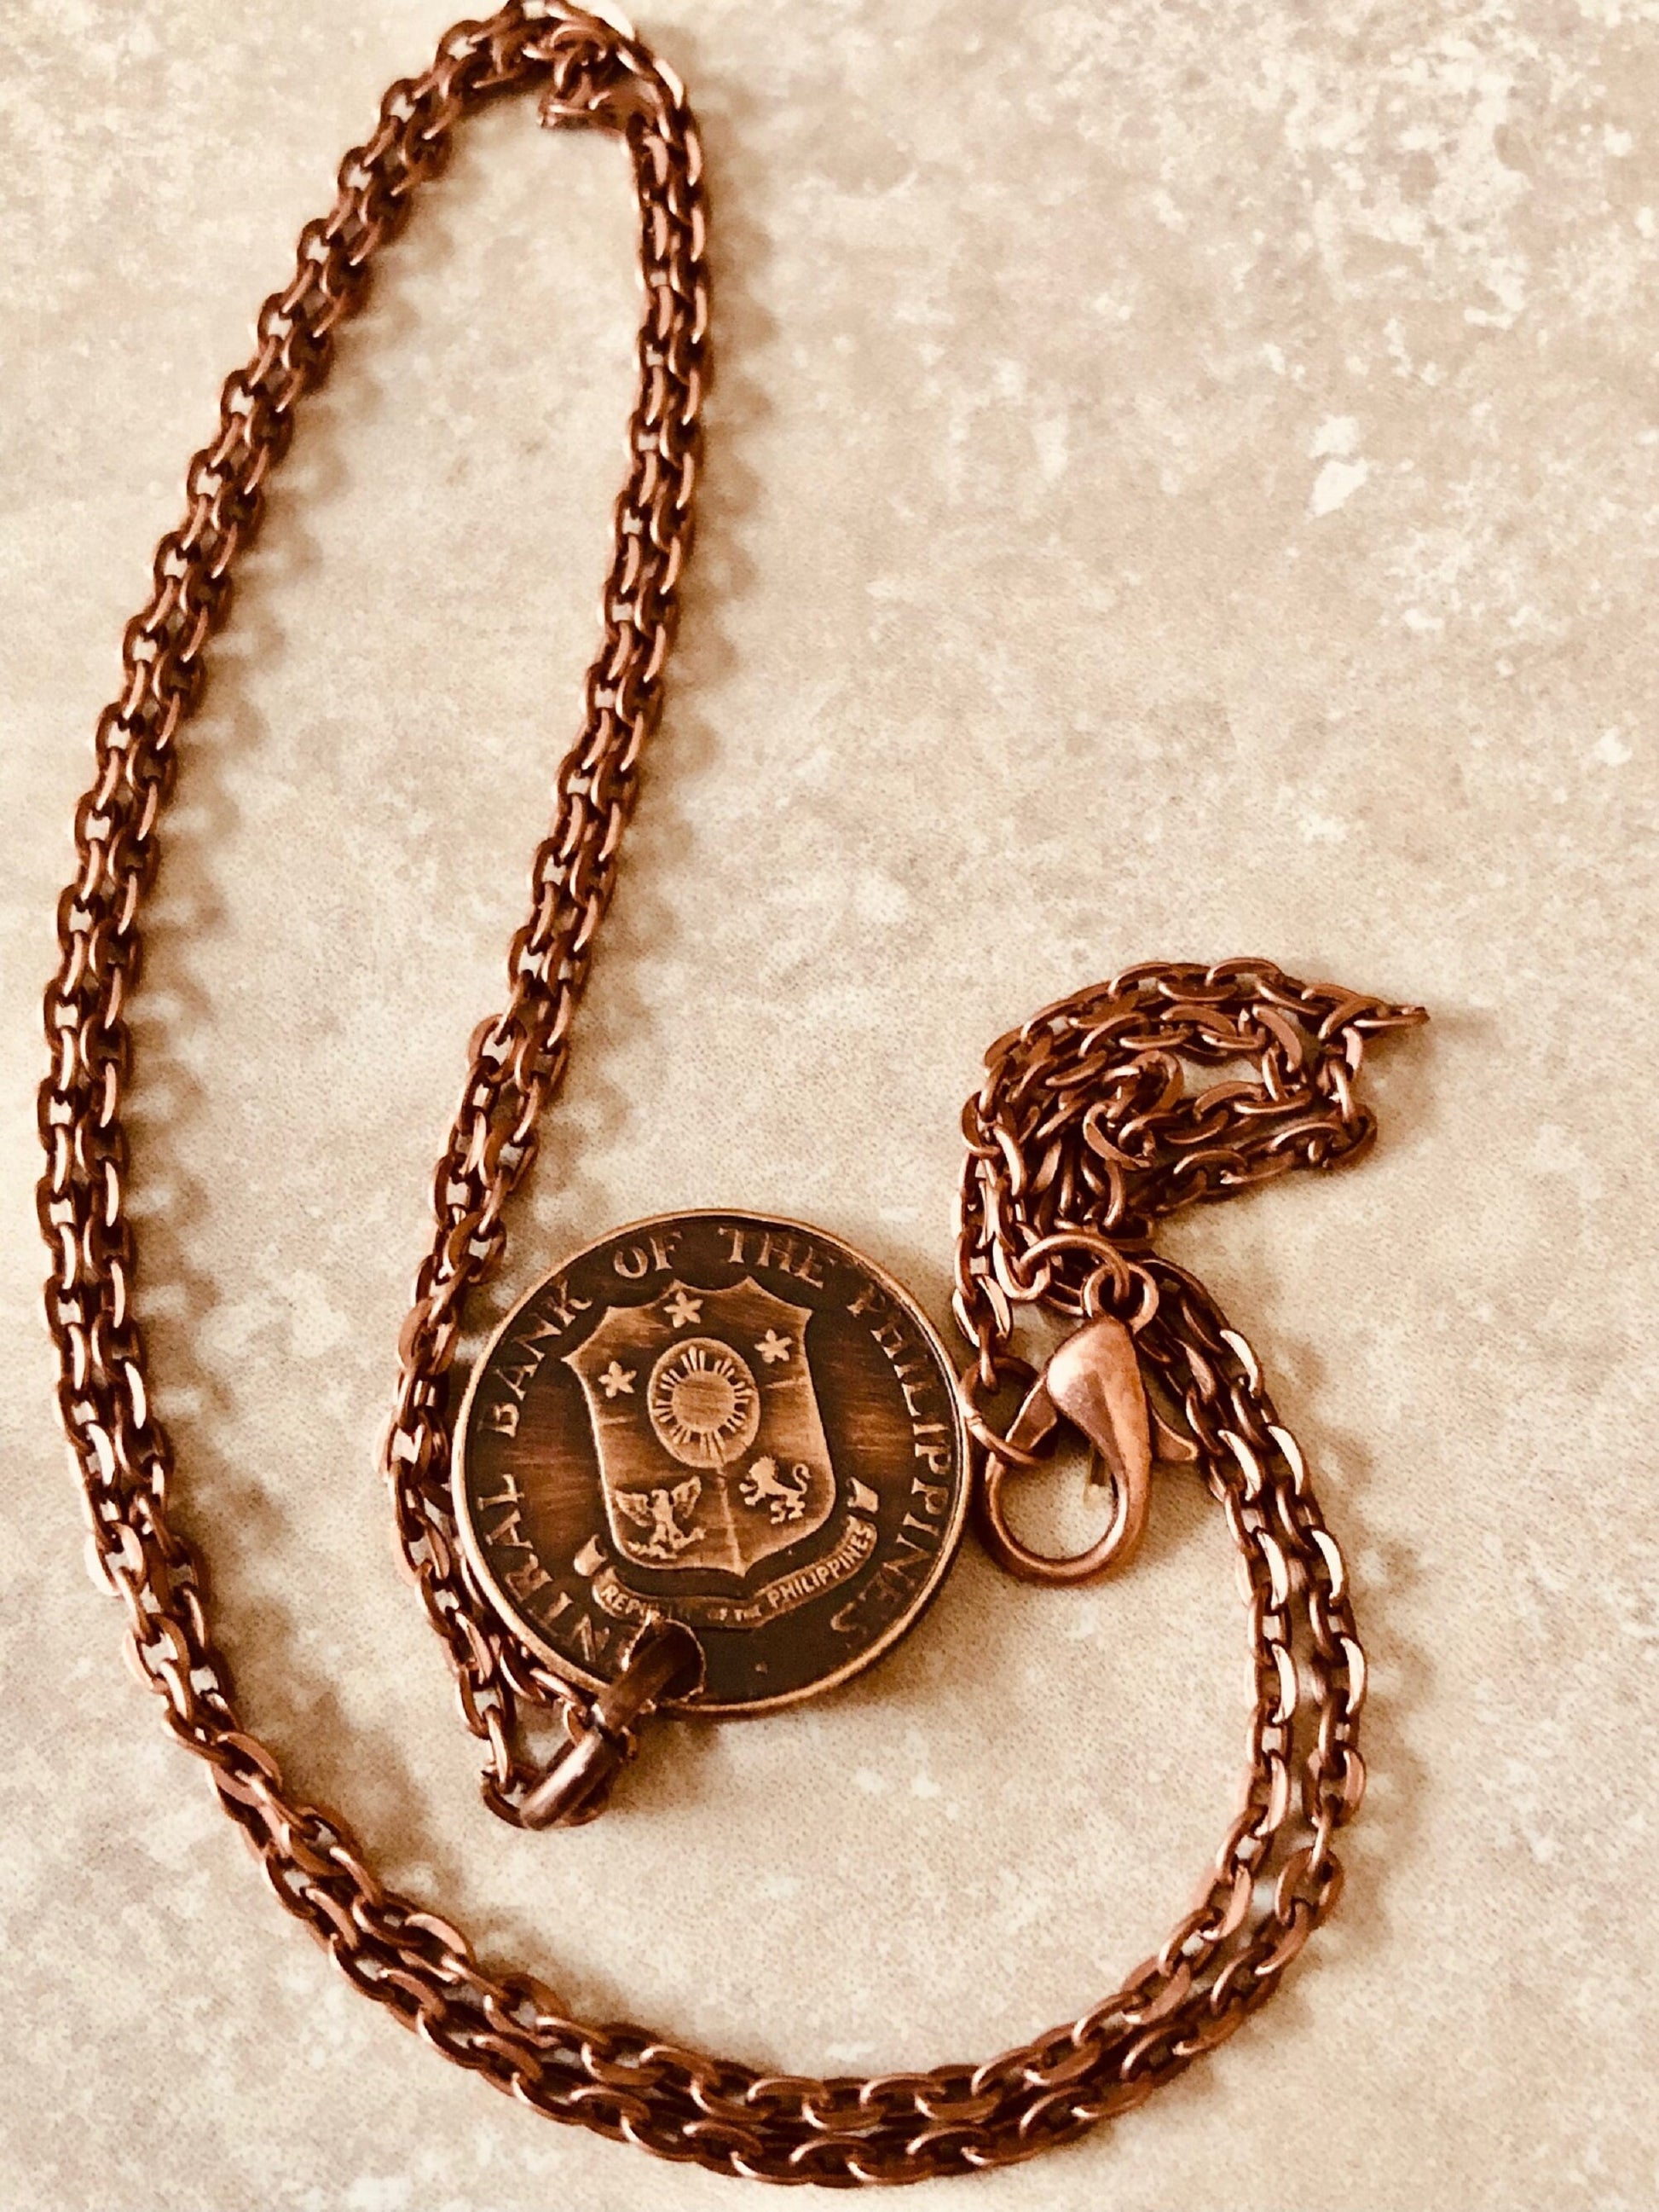 Philippines Coin Necklace Pendant Pilipinas One Centavo Personal Vintage Handmade Jewelry Gift Friend Charm For Him Her World Coin Collector